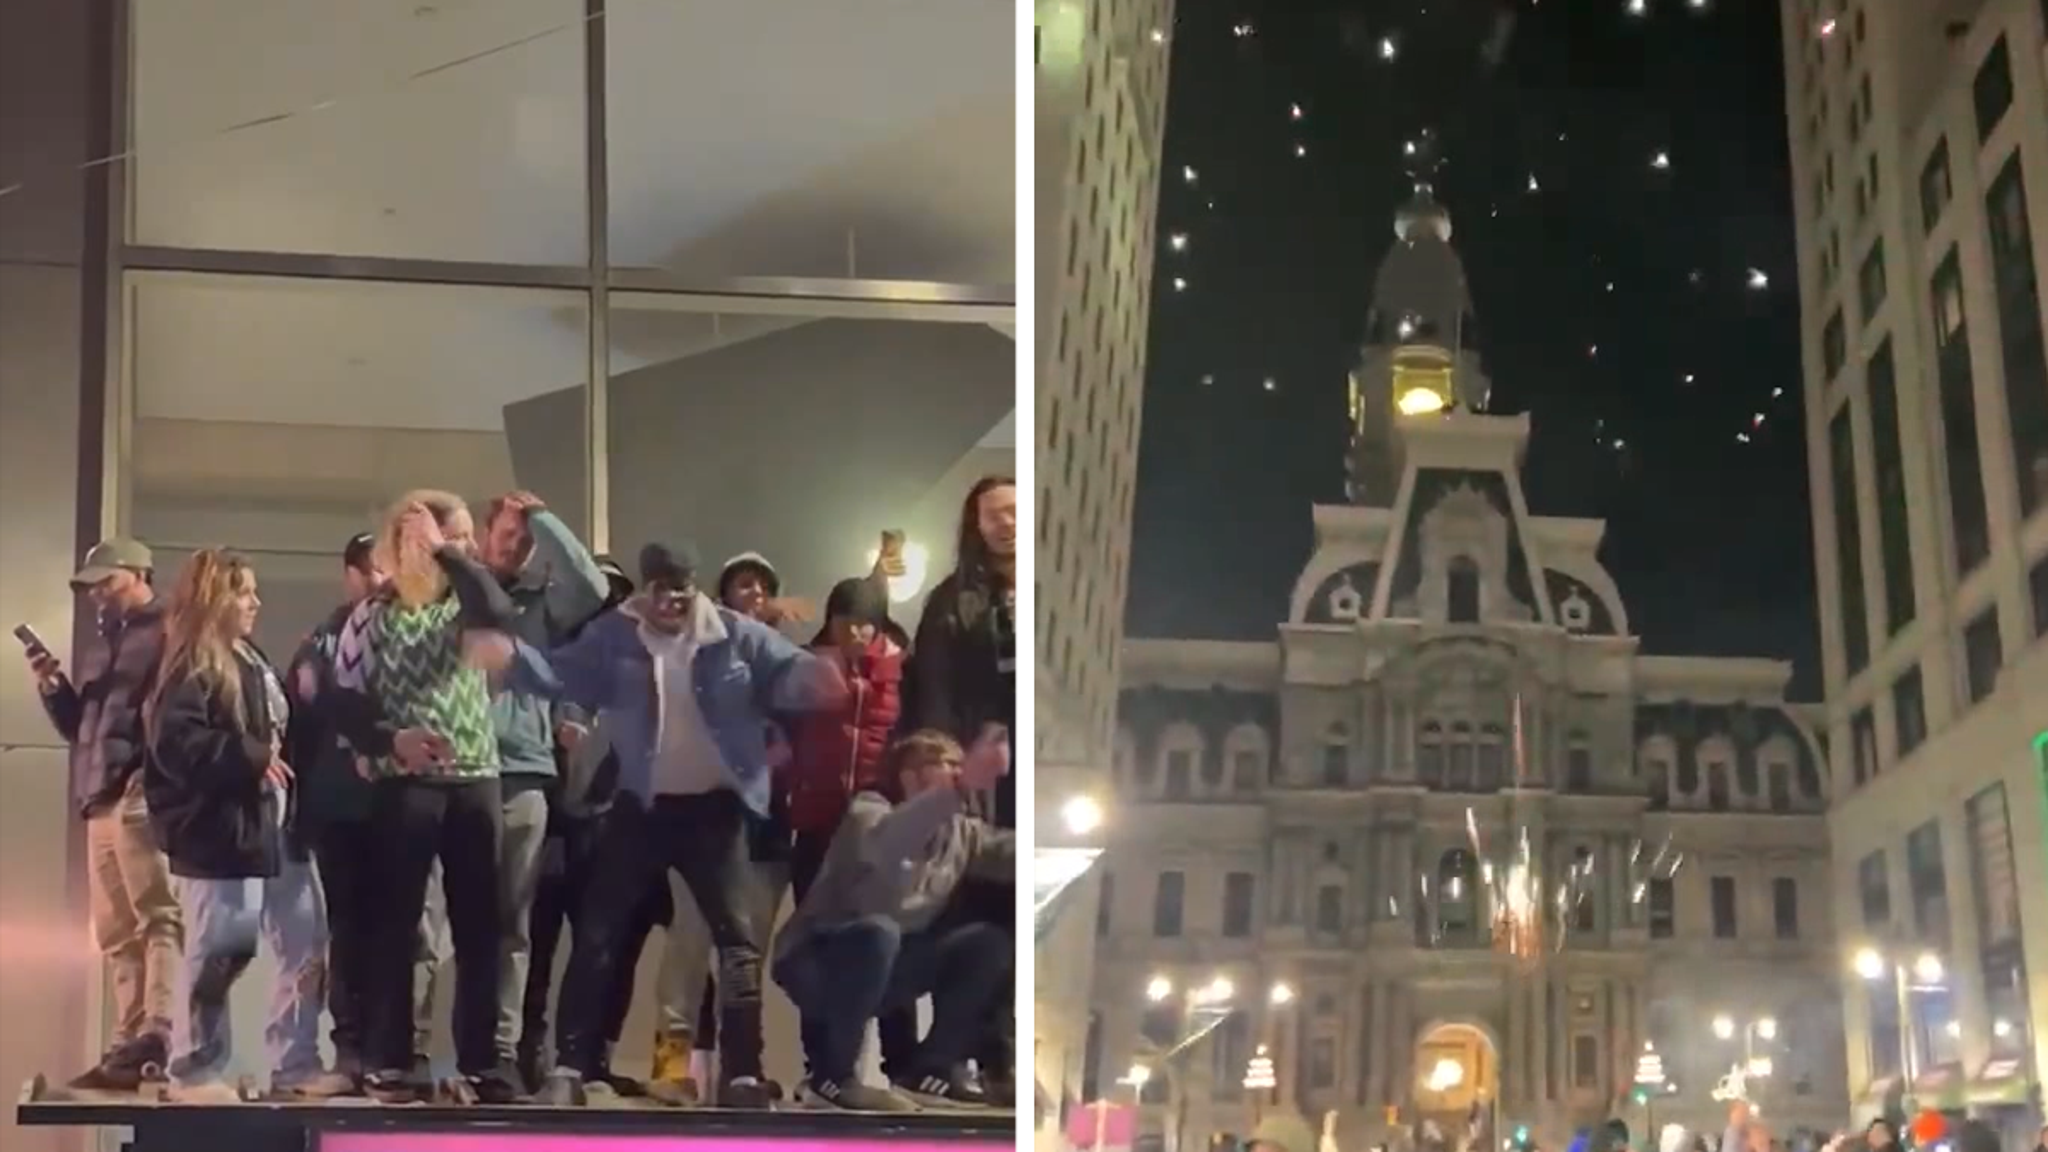 Eagles Fans Chant ‘F*** the Chiefs’ in Downtown Philly After Super Bowl